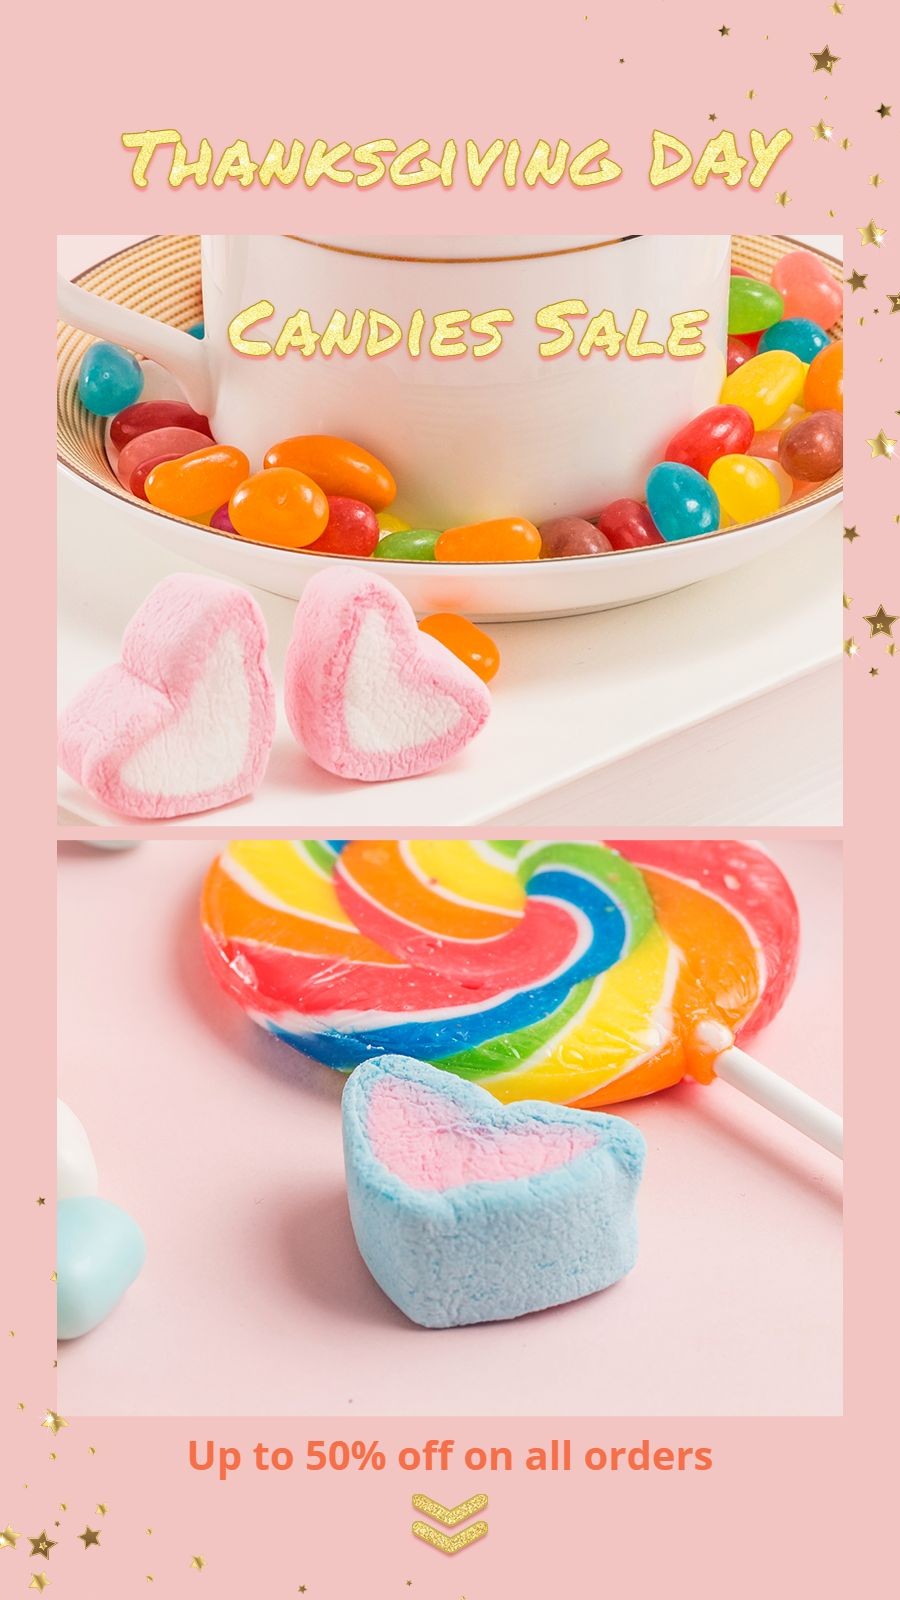 Handmade Candy Holiday Promotion Thanksgiving Ecommerce Story预览效果